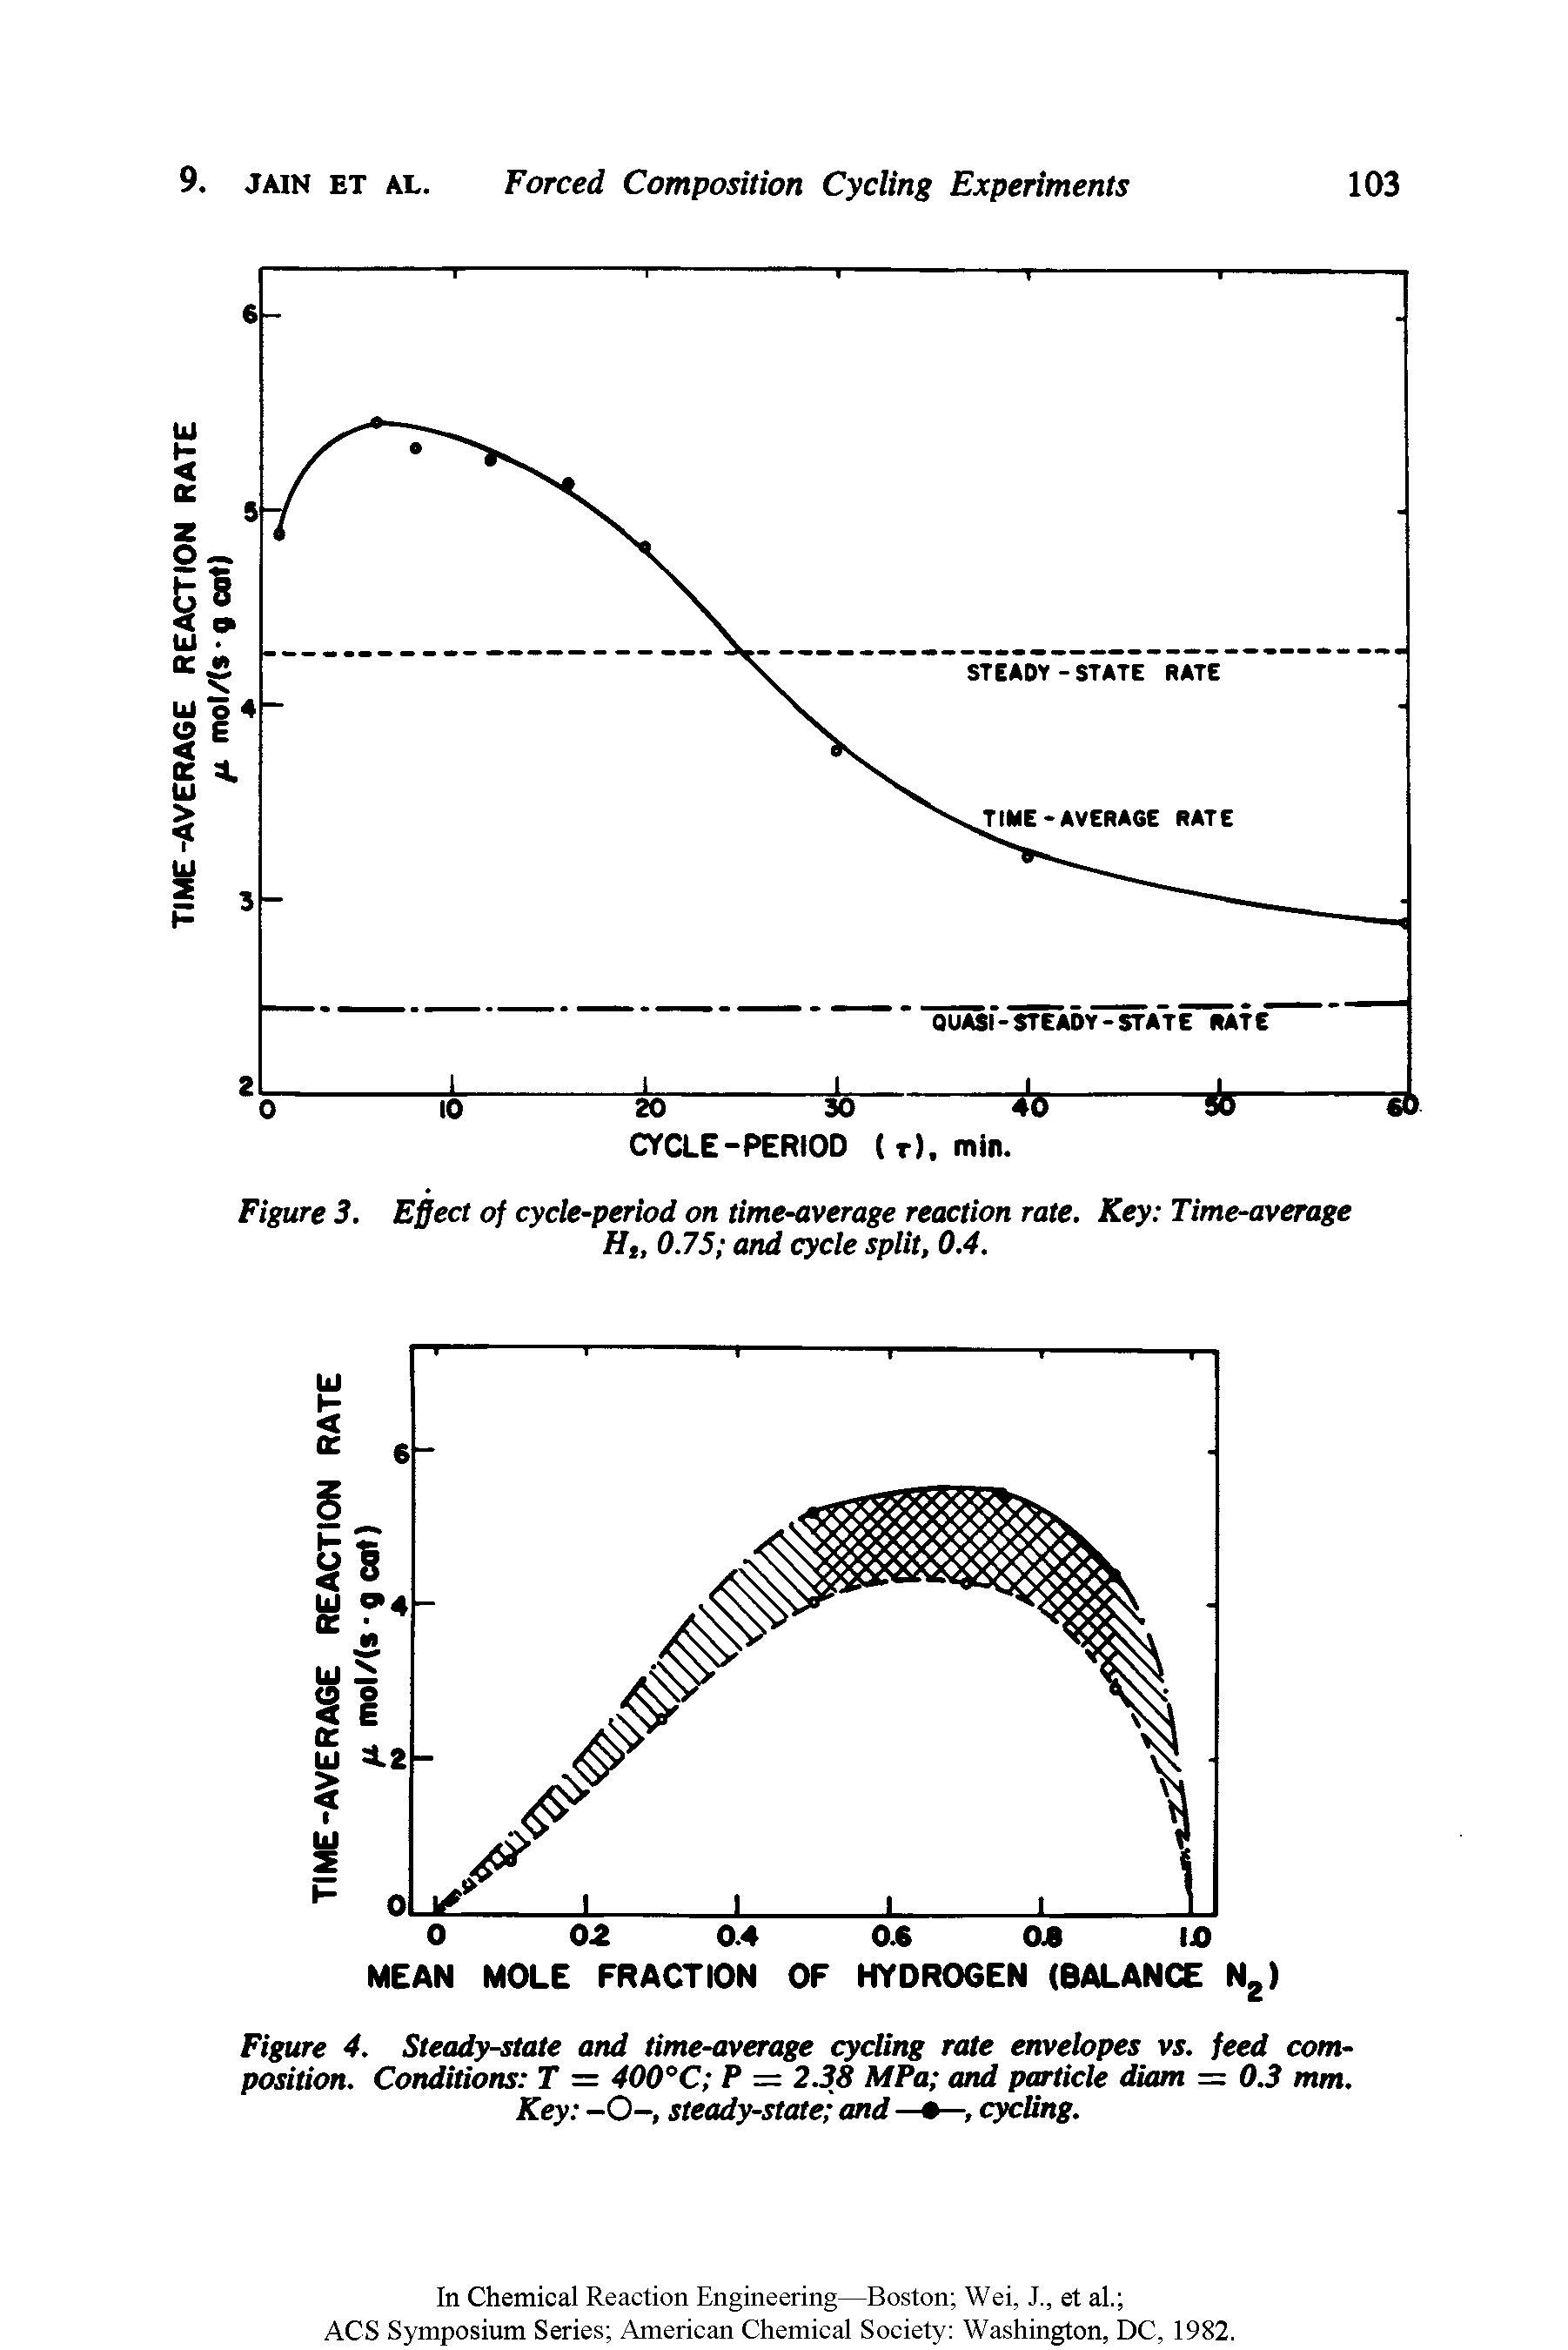 Figure 4. Steady-state and time-average cycling rate envelopes vs. feed composition. Conditions T = 400°C P = 2.38 MPa and particle diam = 0.3 mm. Key -0-, steady-state and cycling.